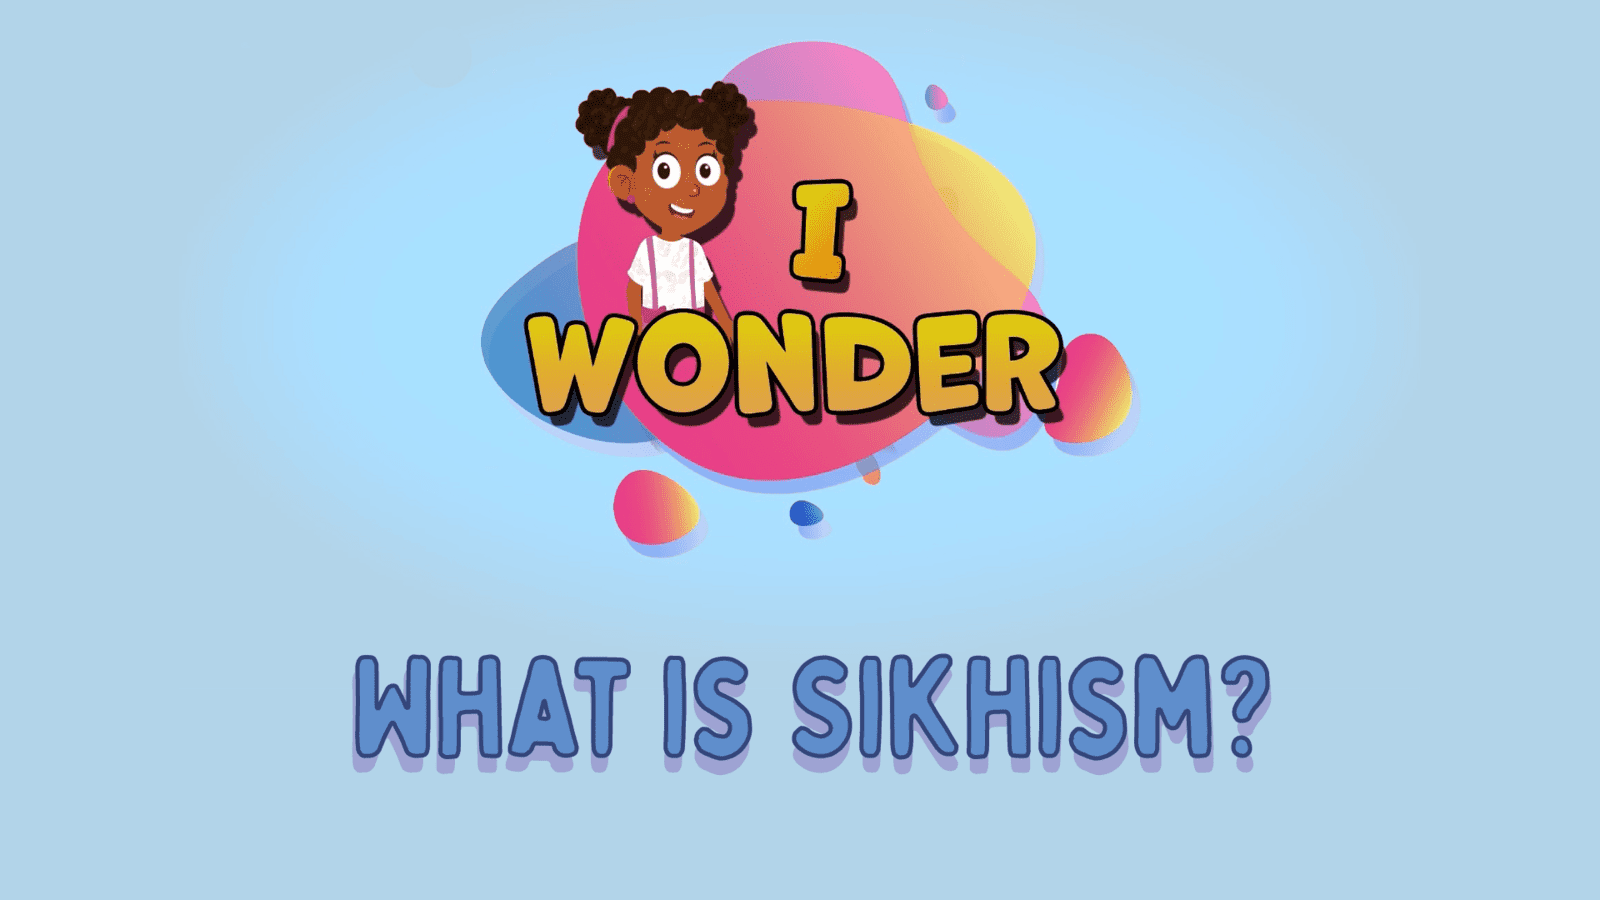 What Is Sikhism?